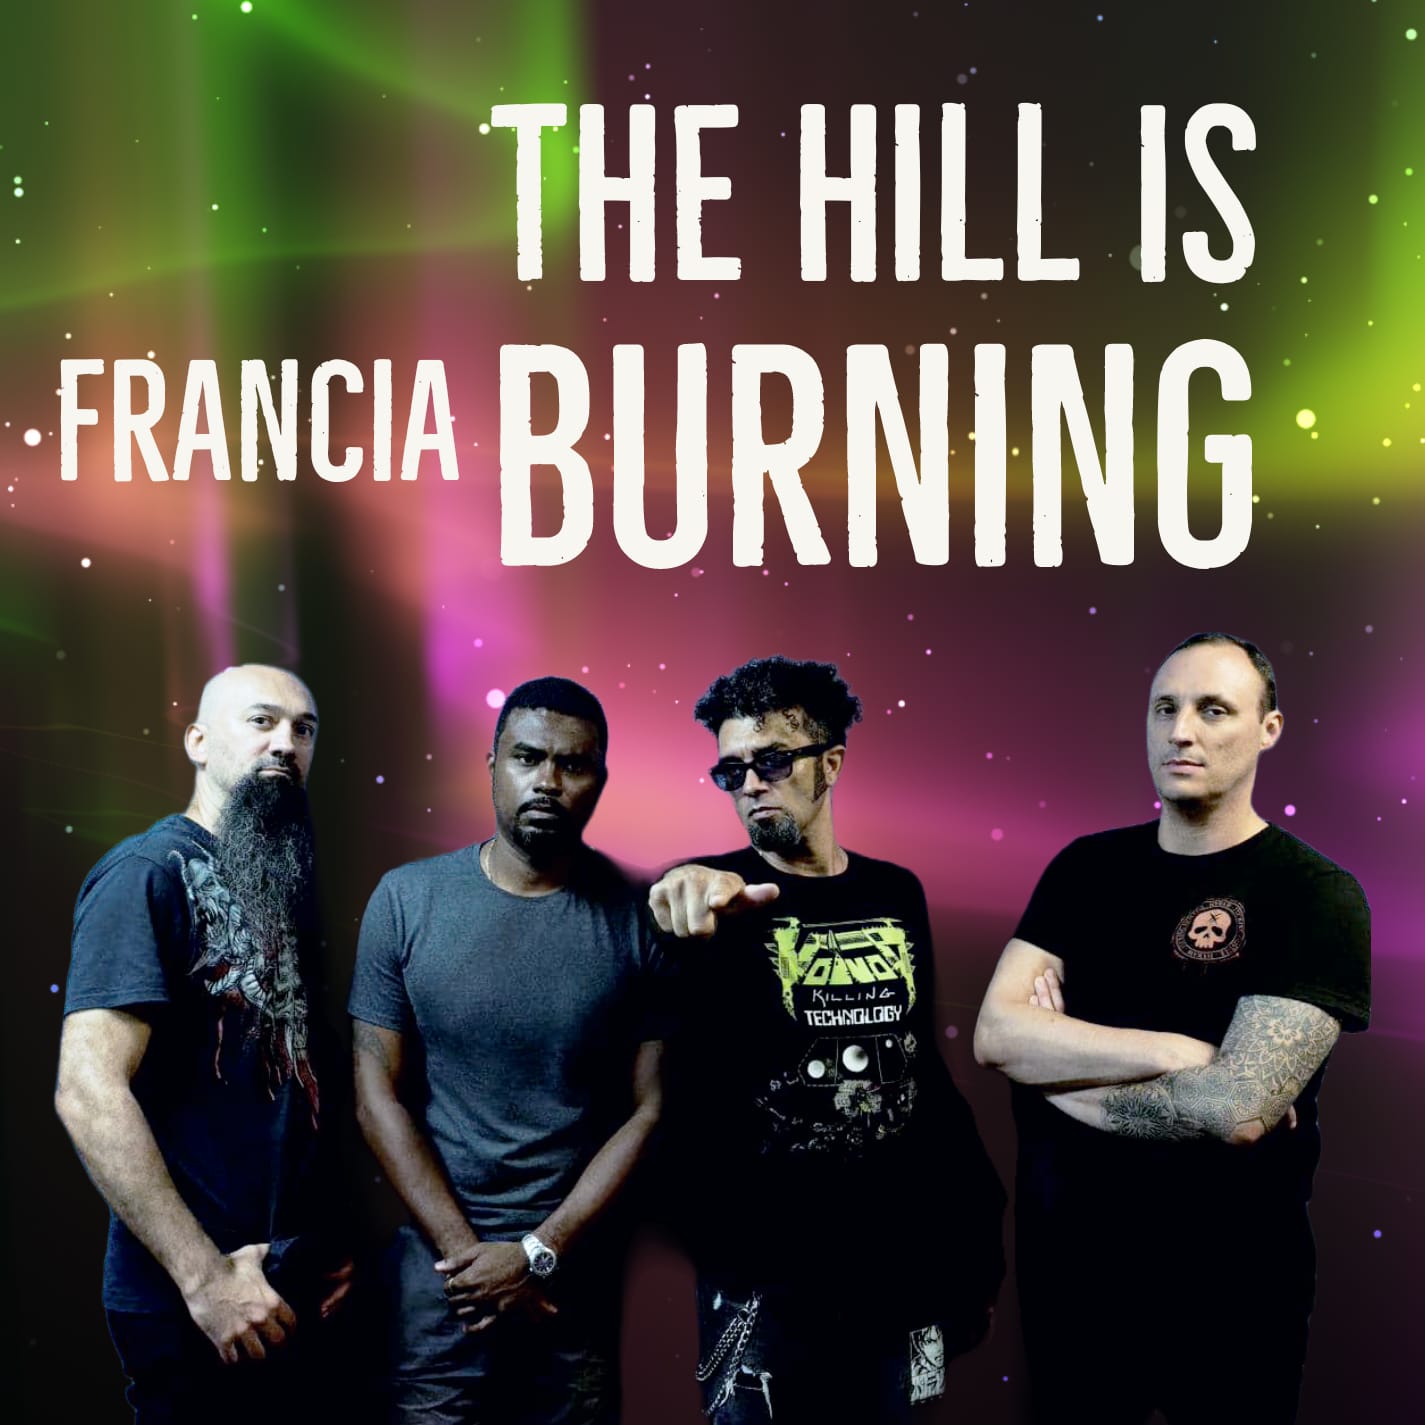 The Hill Is Burning Nota Rockear.Co